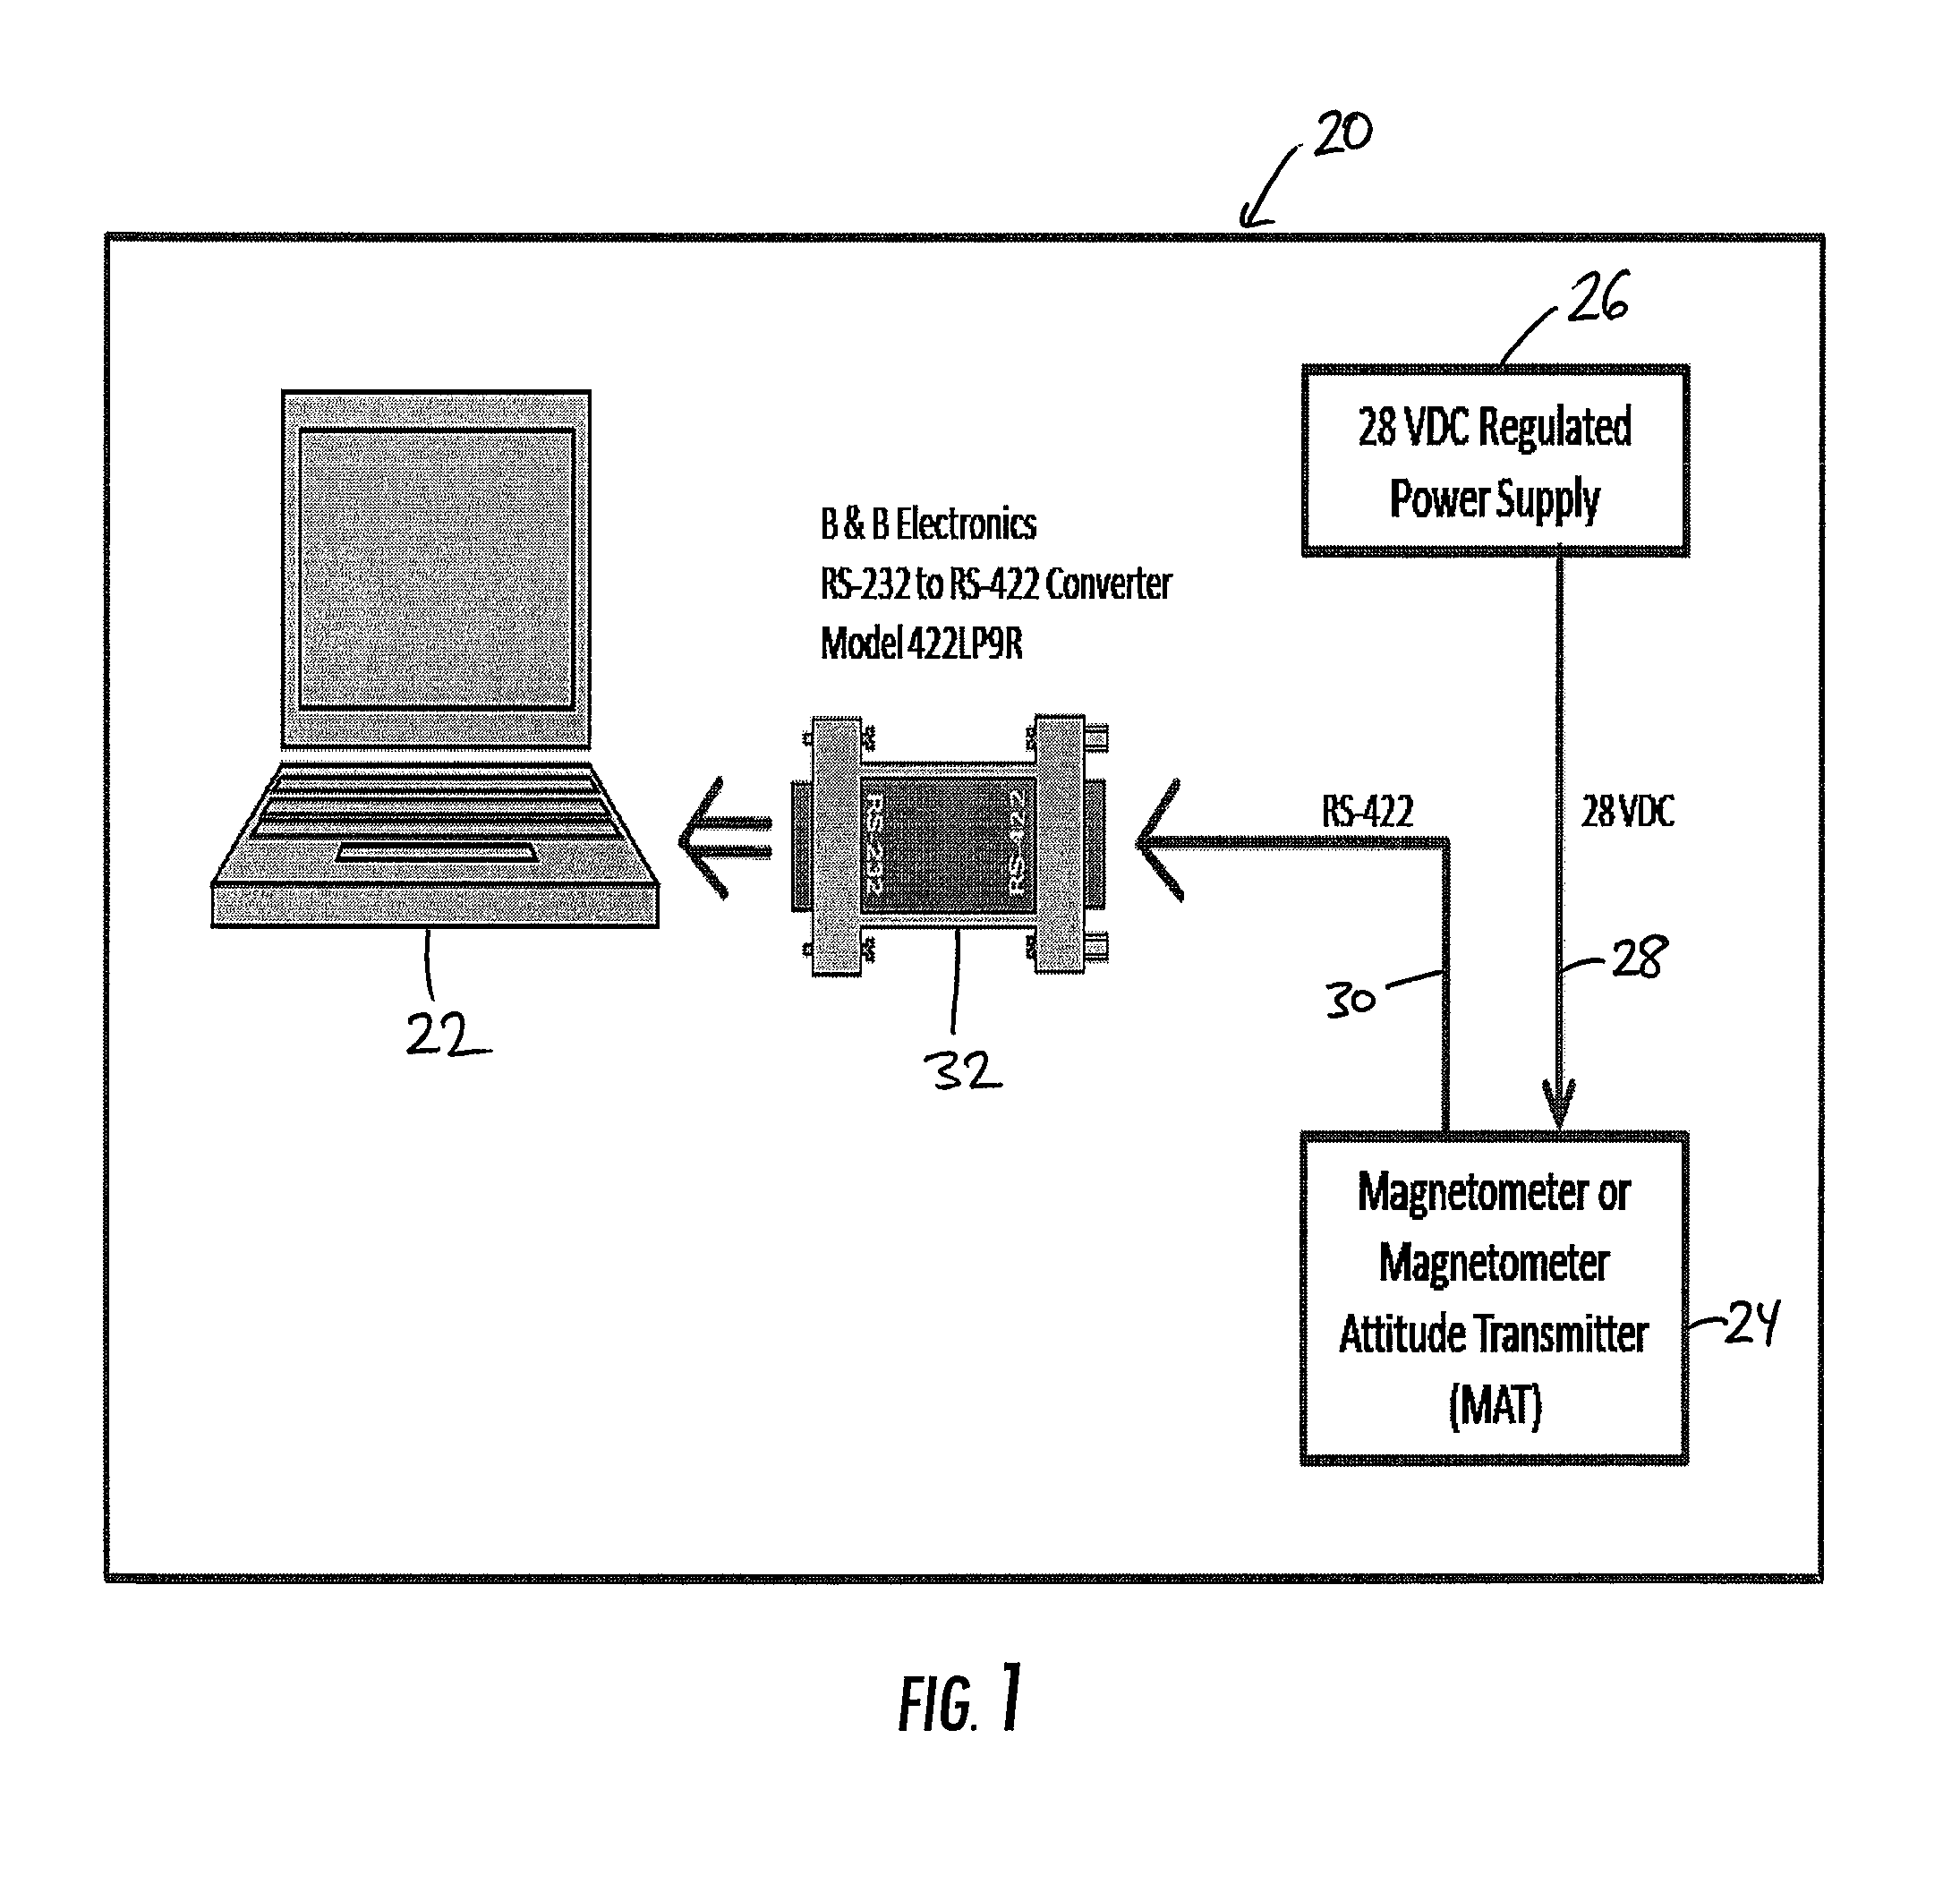 System and method for magnetometer installation